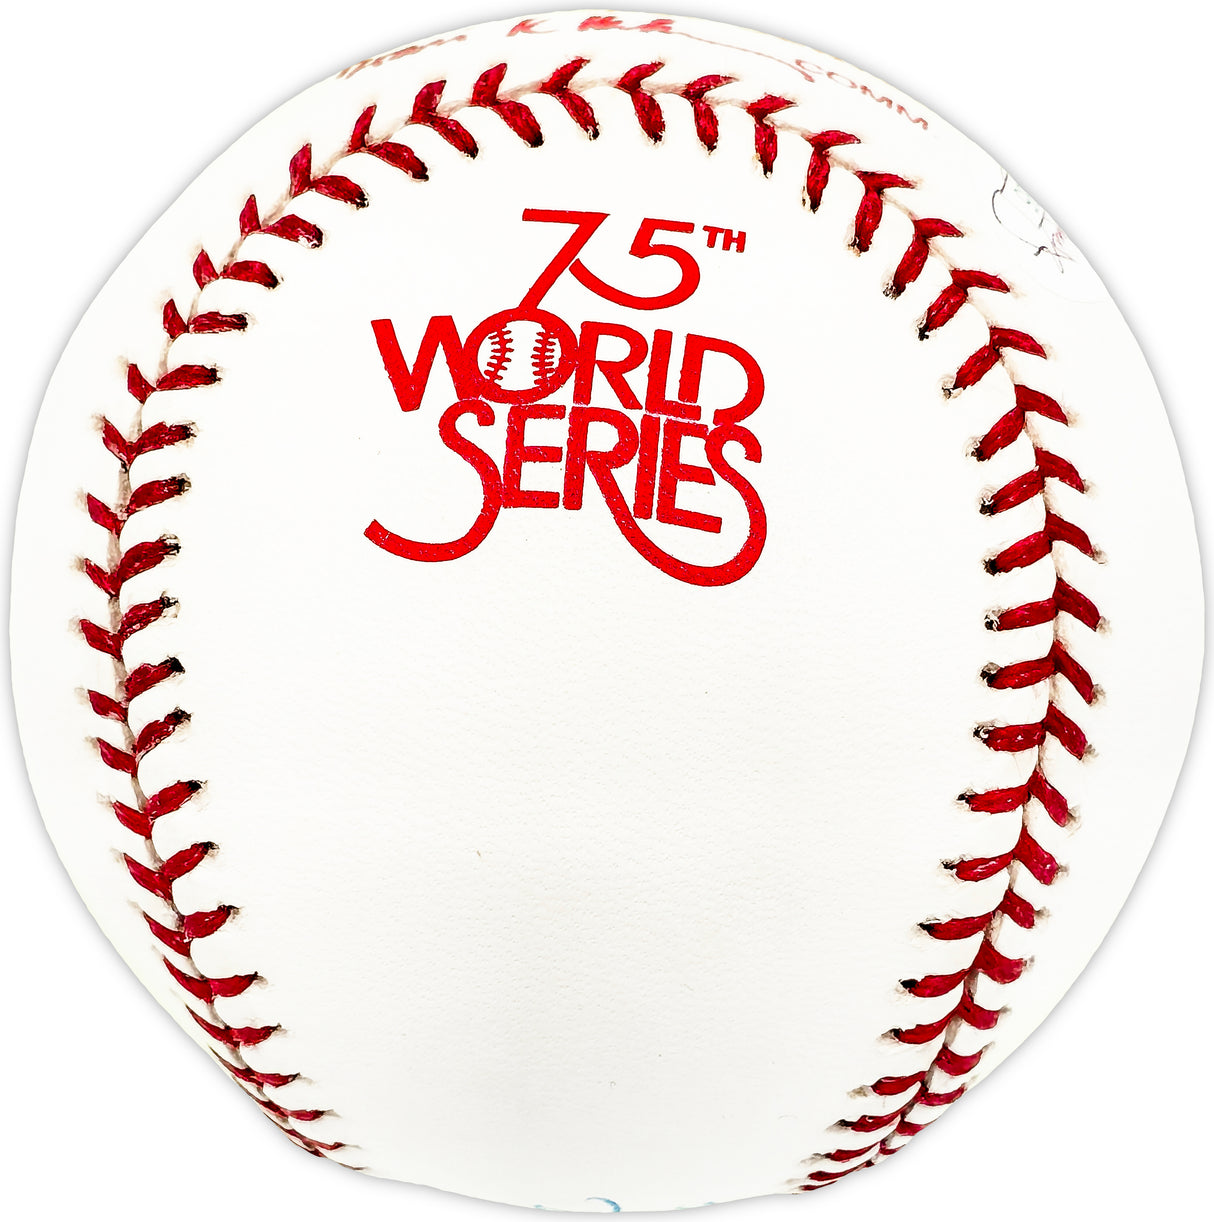 Goose Gossage Autographed Official 1978 World Series Logo MLB Baseball New York Yankees "1978 WS Champs" JSA #A19935